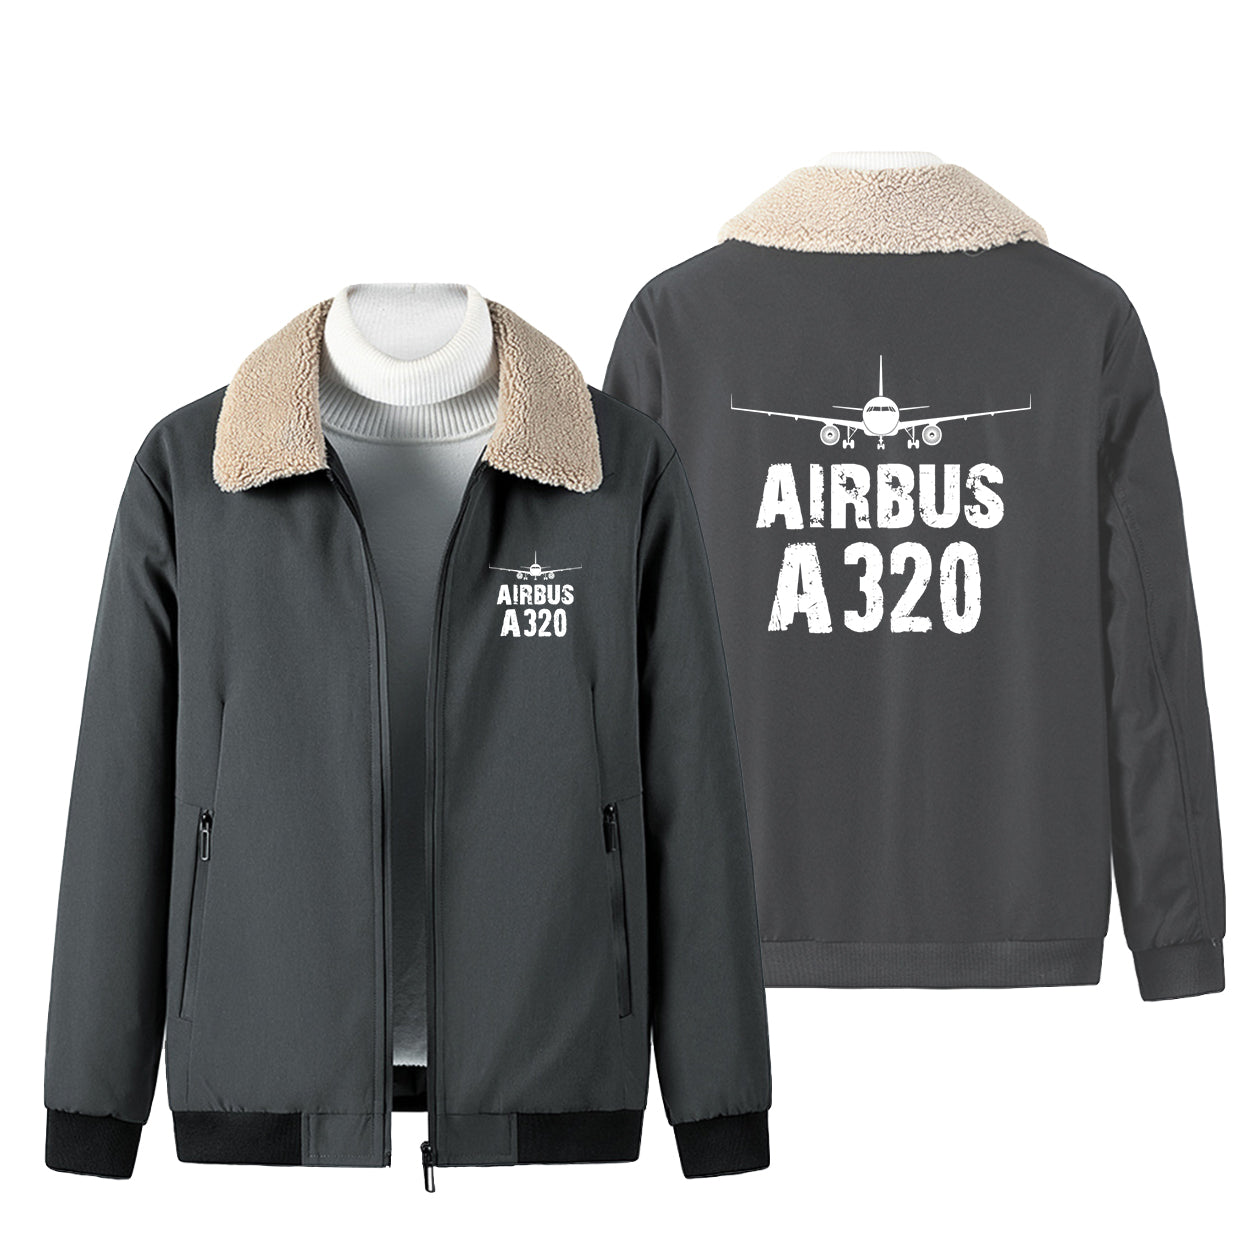 Airbus A320 & Plane Designed Winter Bomber Jackets